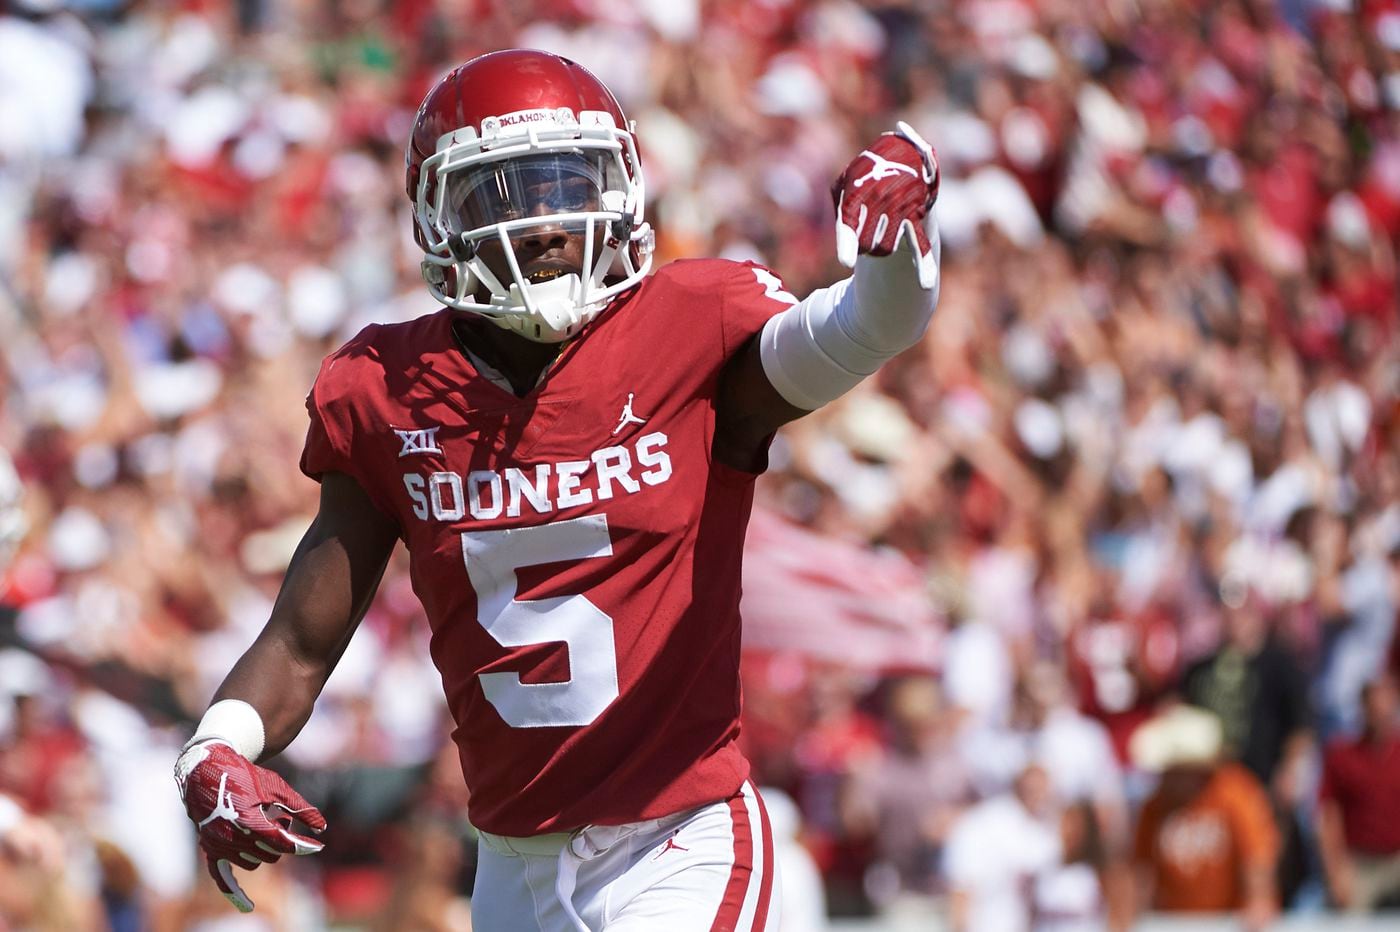 NFL draft prospect Marquise Brown, who grew up an Eagles 